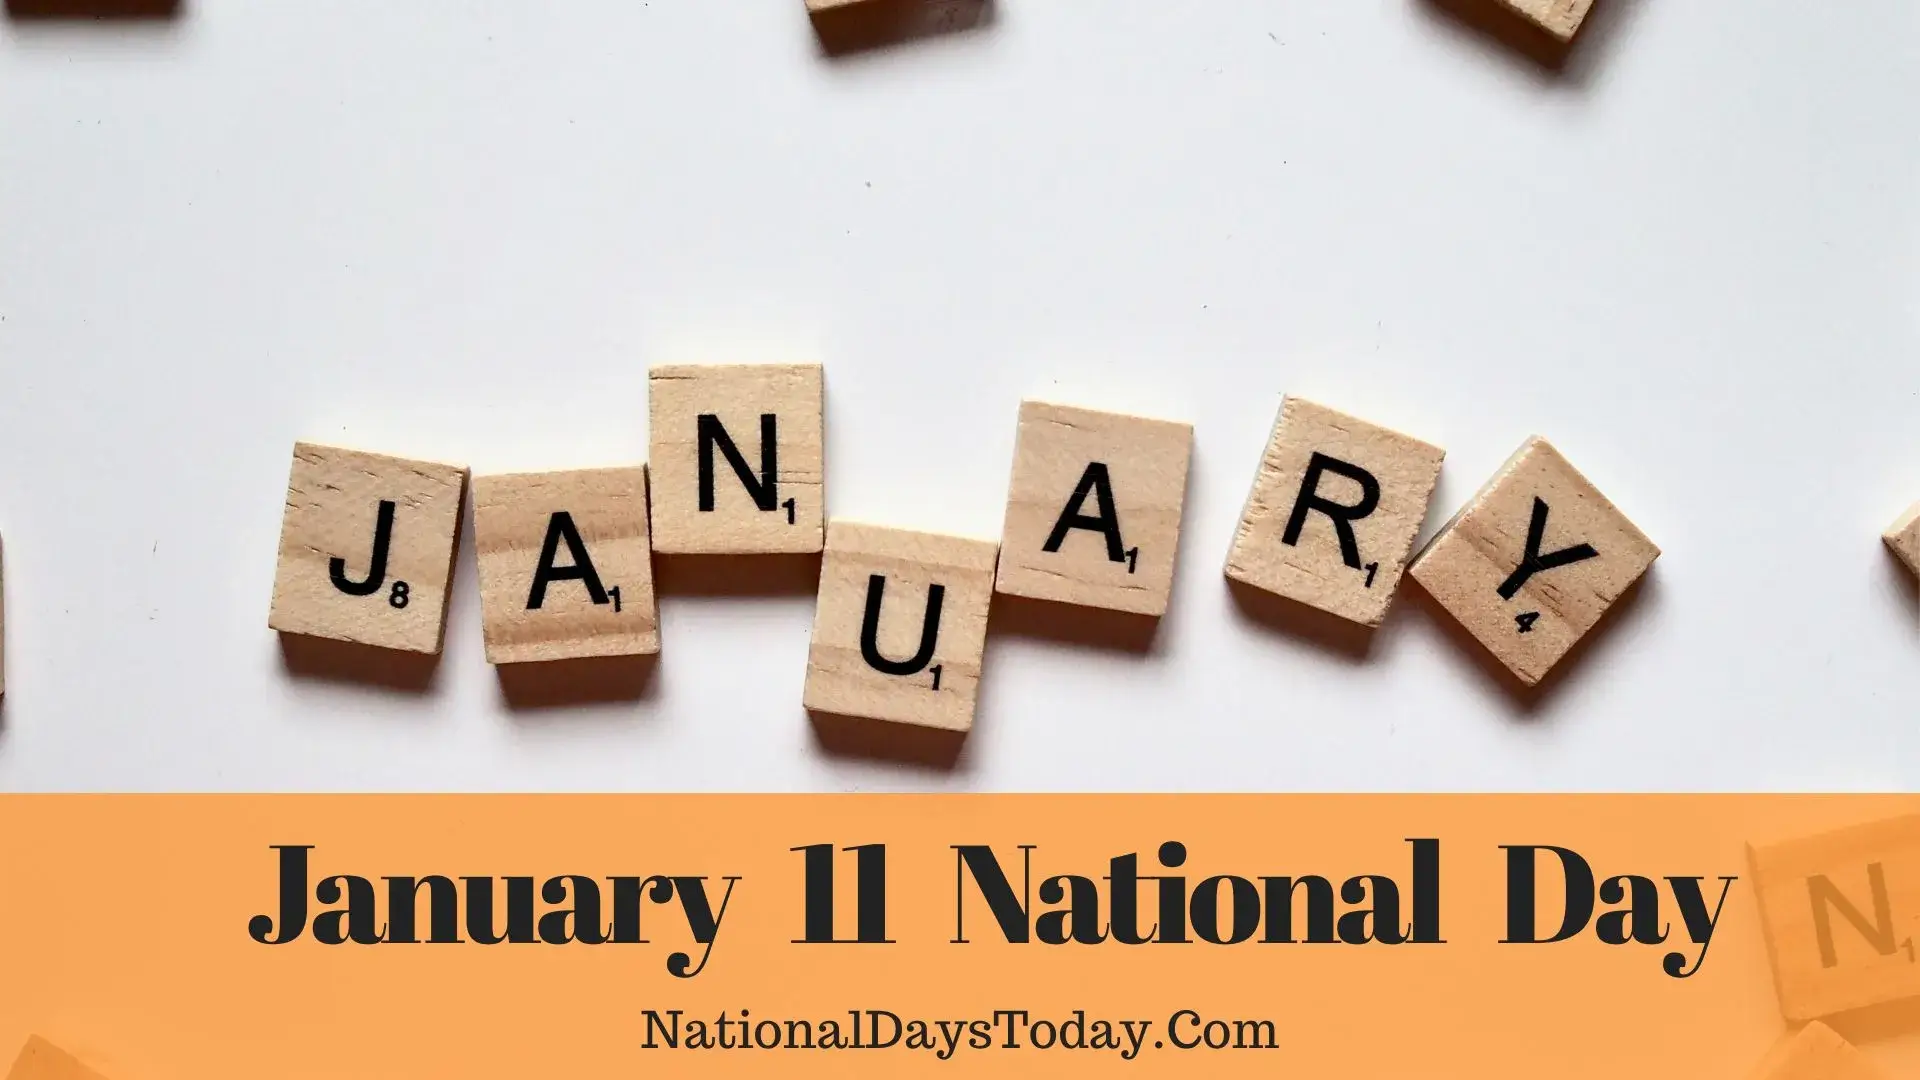 January 11 National Day You Will be Surprised By The List!